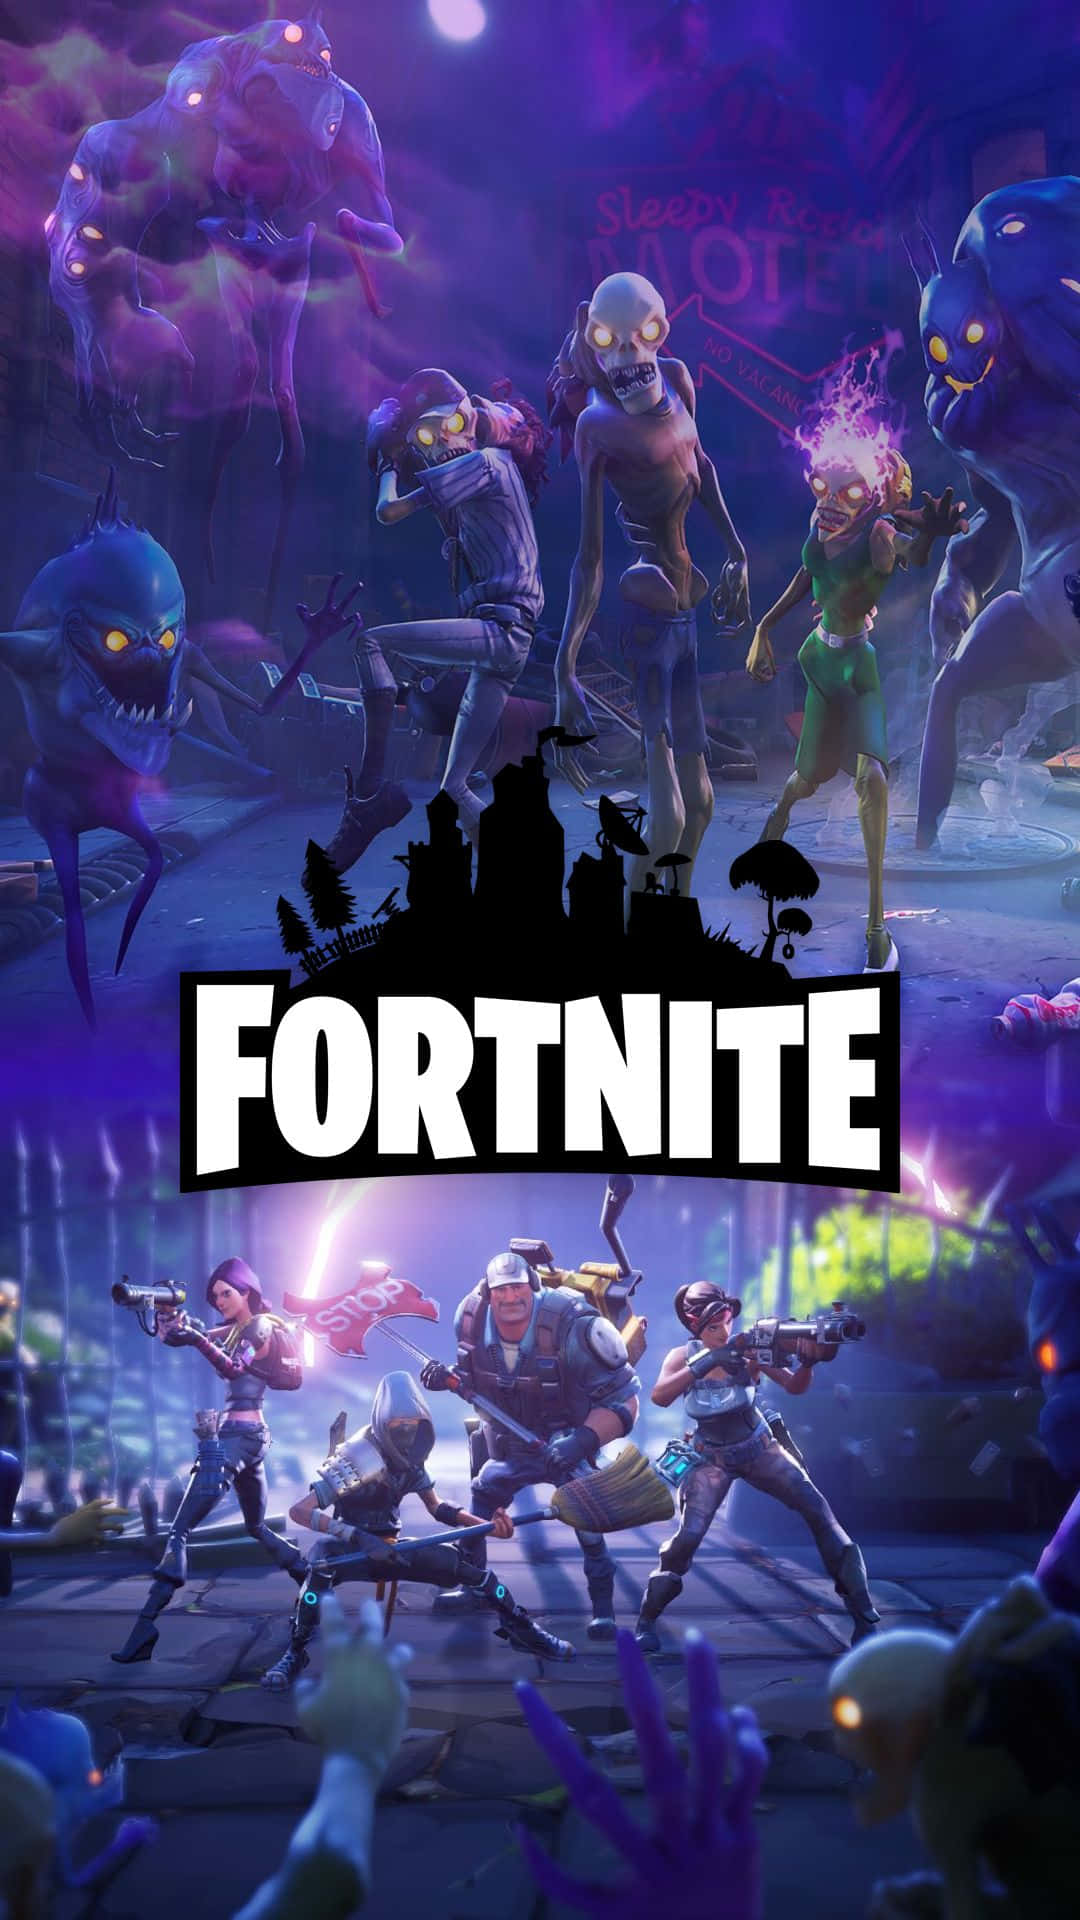 Take on the fight with Wildcat in Fortnite and join the battle! Wallpaper